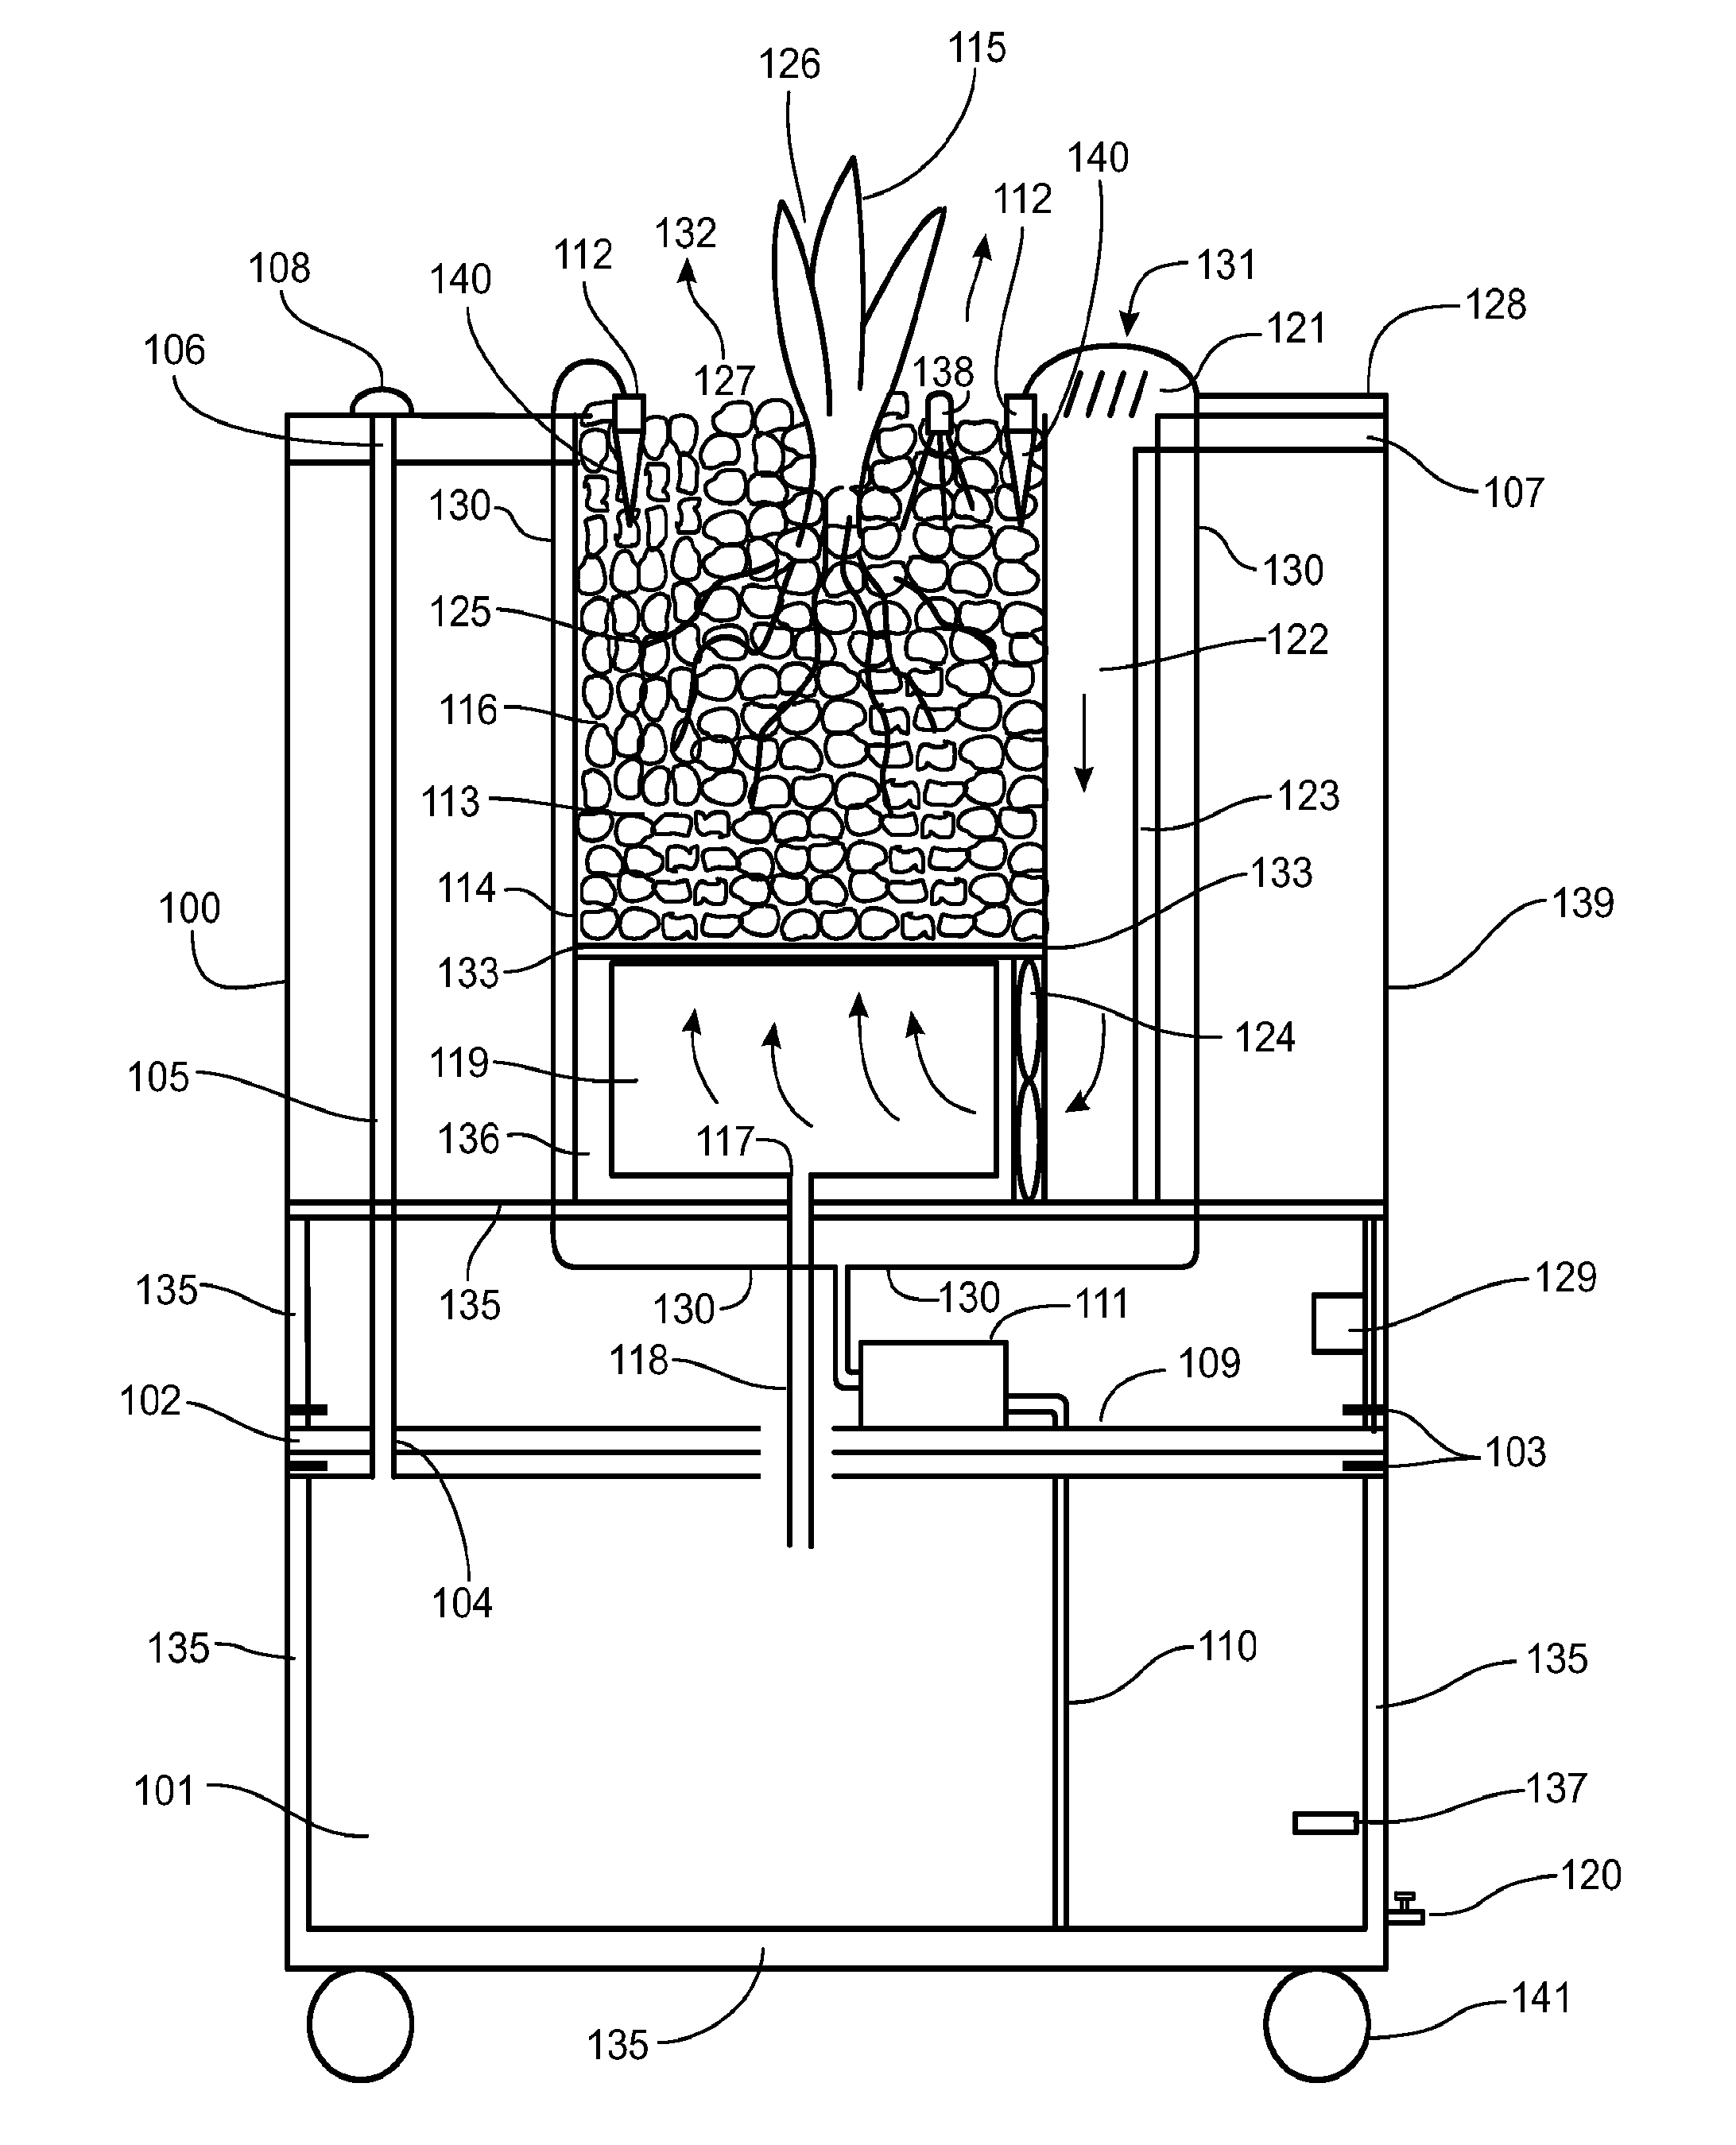 Water, Light and Airflow Control System and Configuration for a Plant Air Purifier